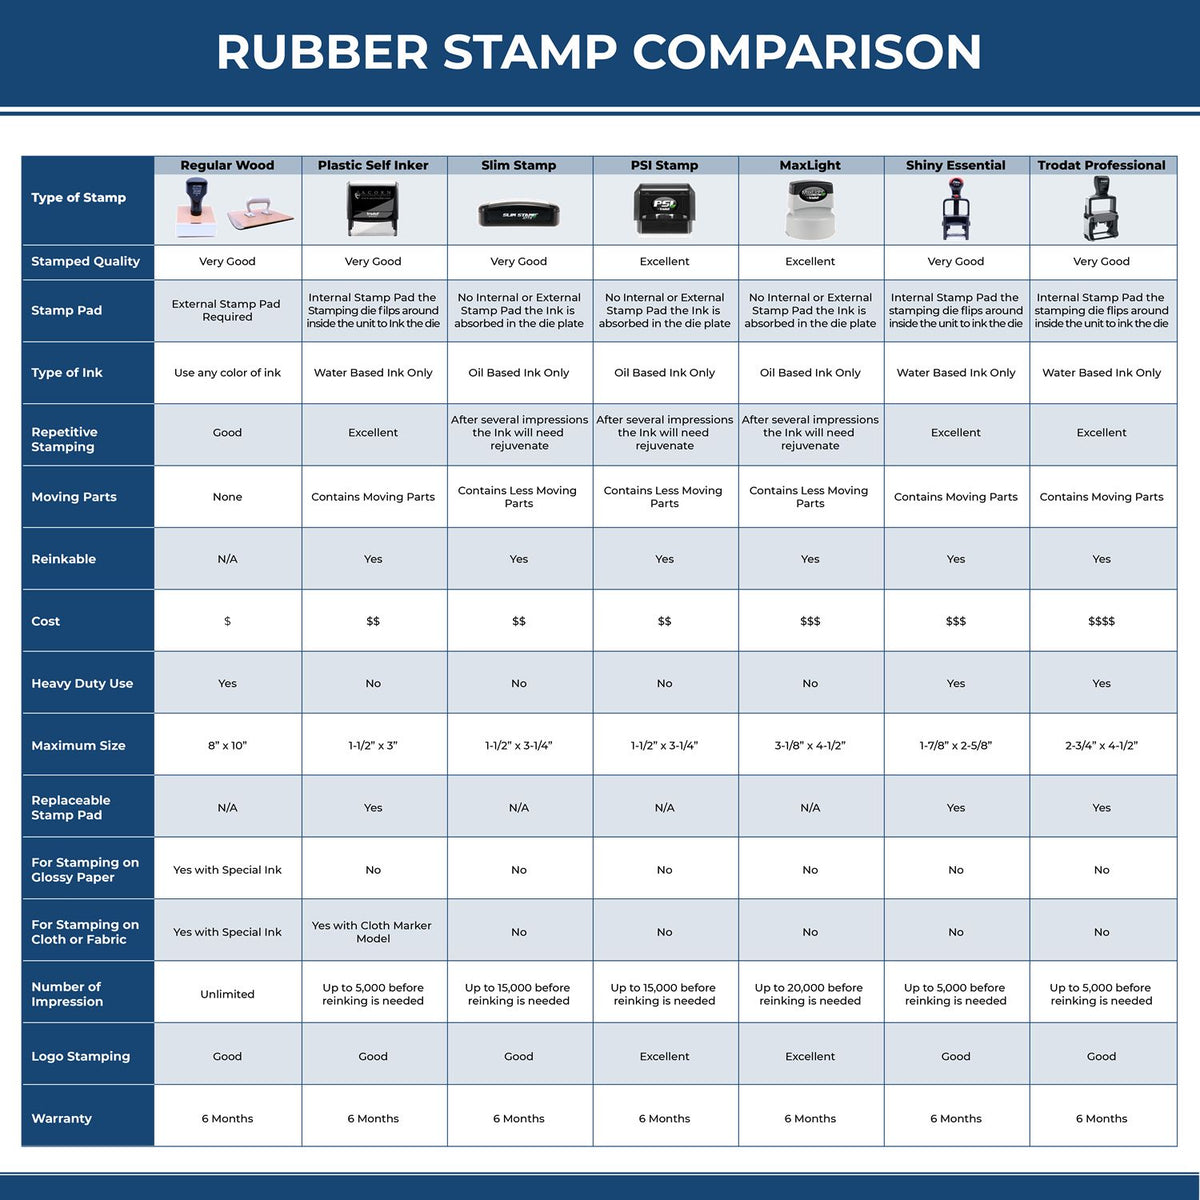 Large Self Inking Not Approved For Construction Stamp 4137S Rubber Stamp Comparison